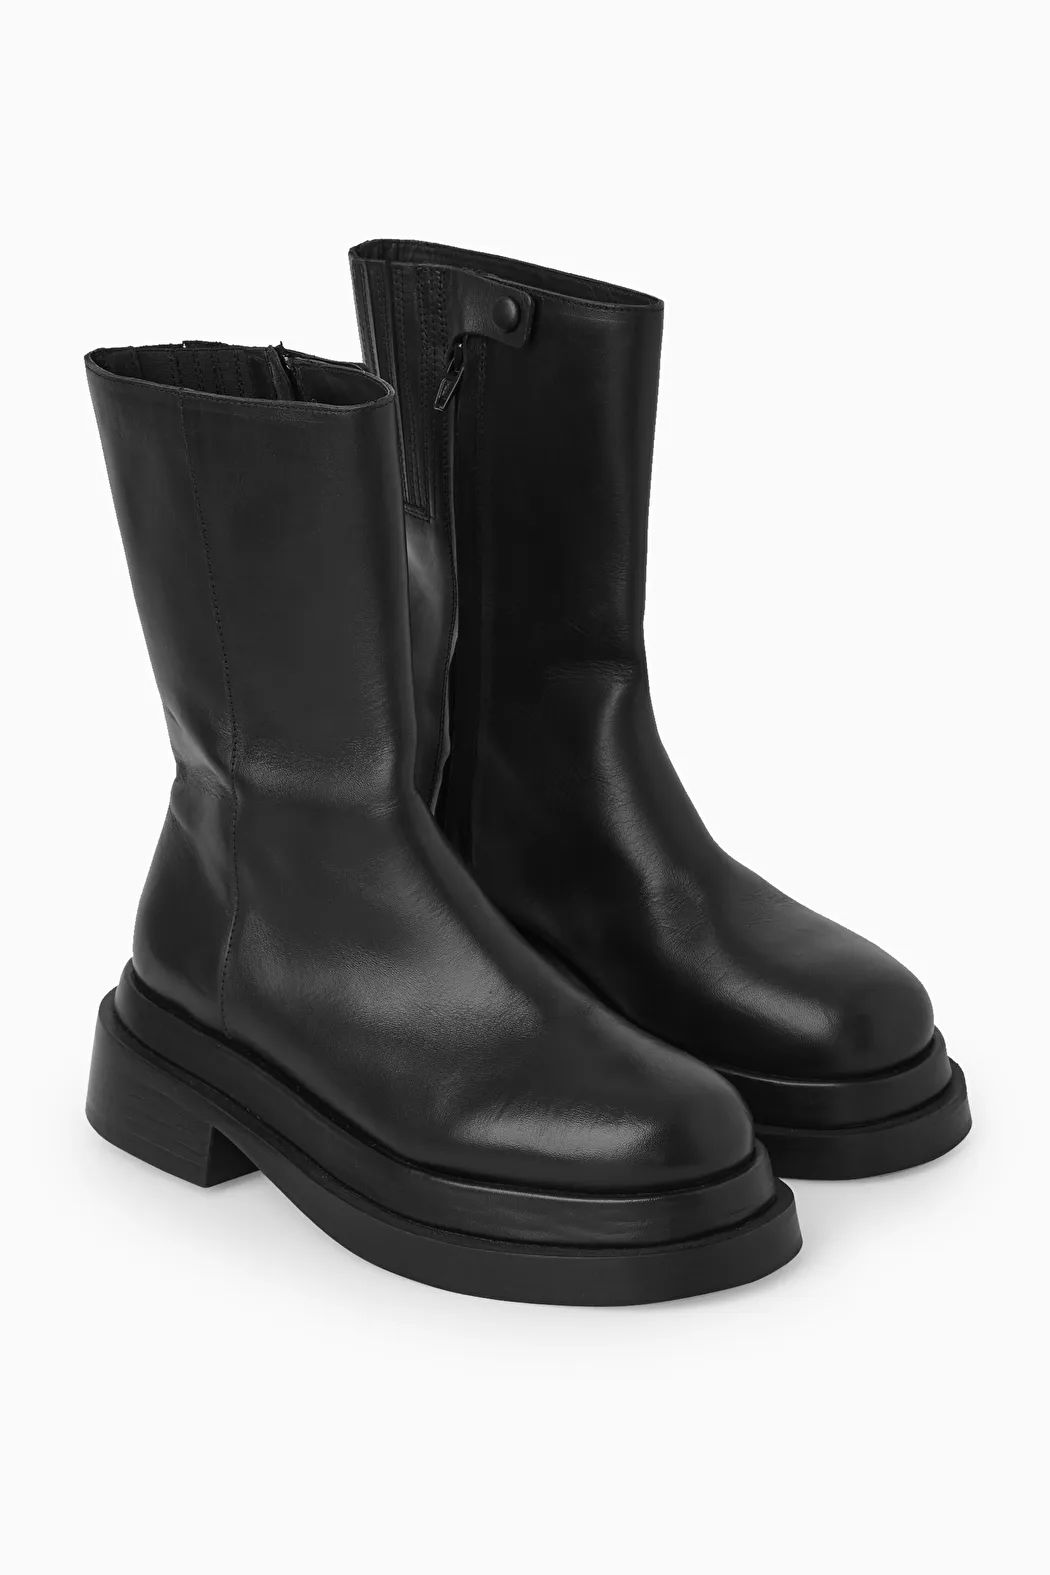 CHUNKY LEATHER BOOTS | COS UK